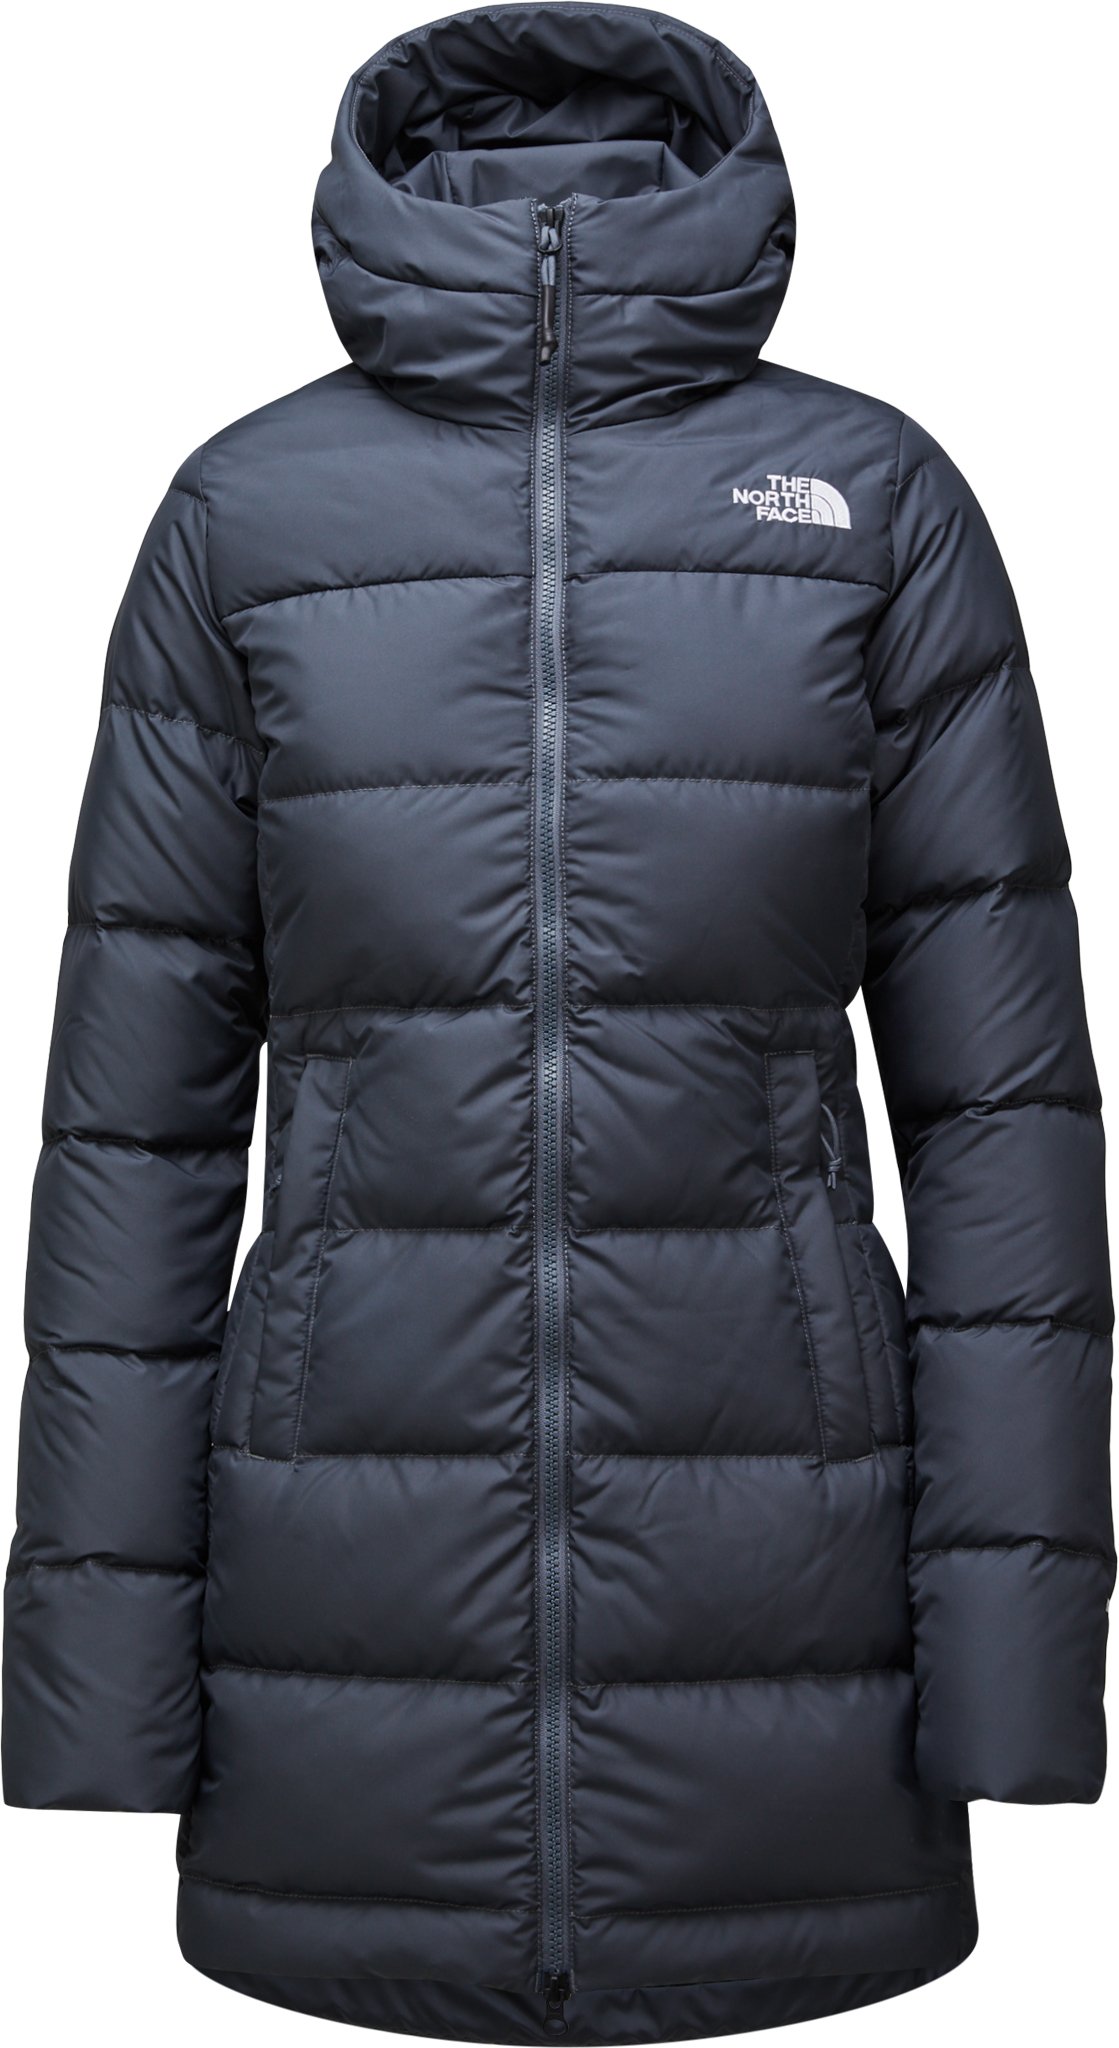 The North Face Gotham Parka - Women's | The Last Hunt